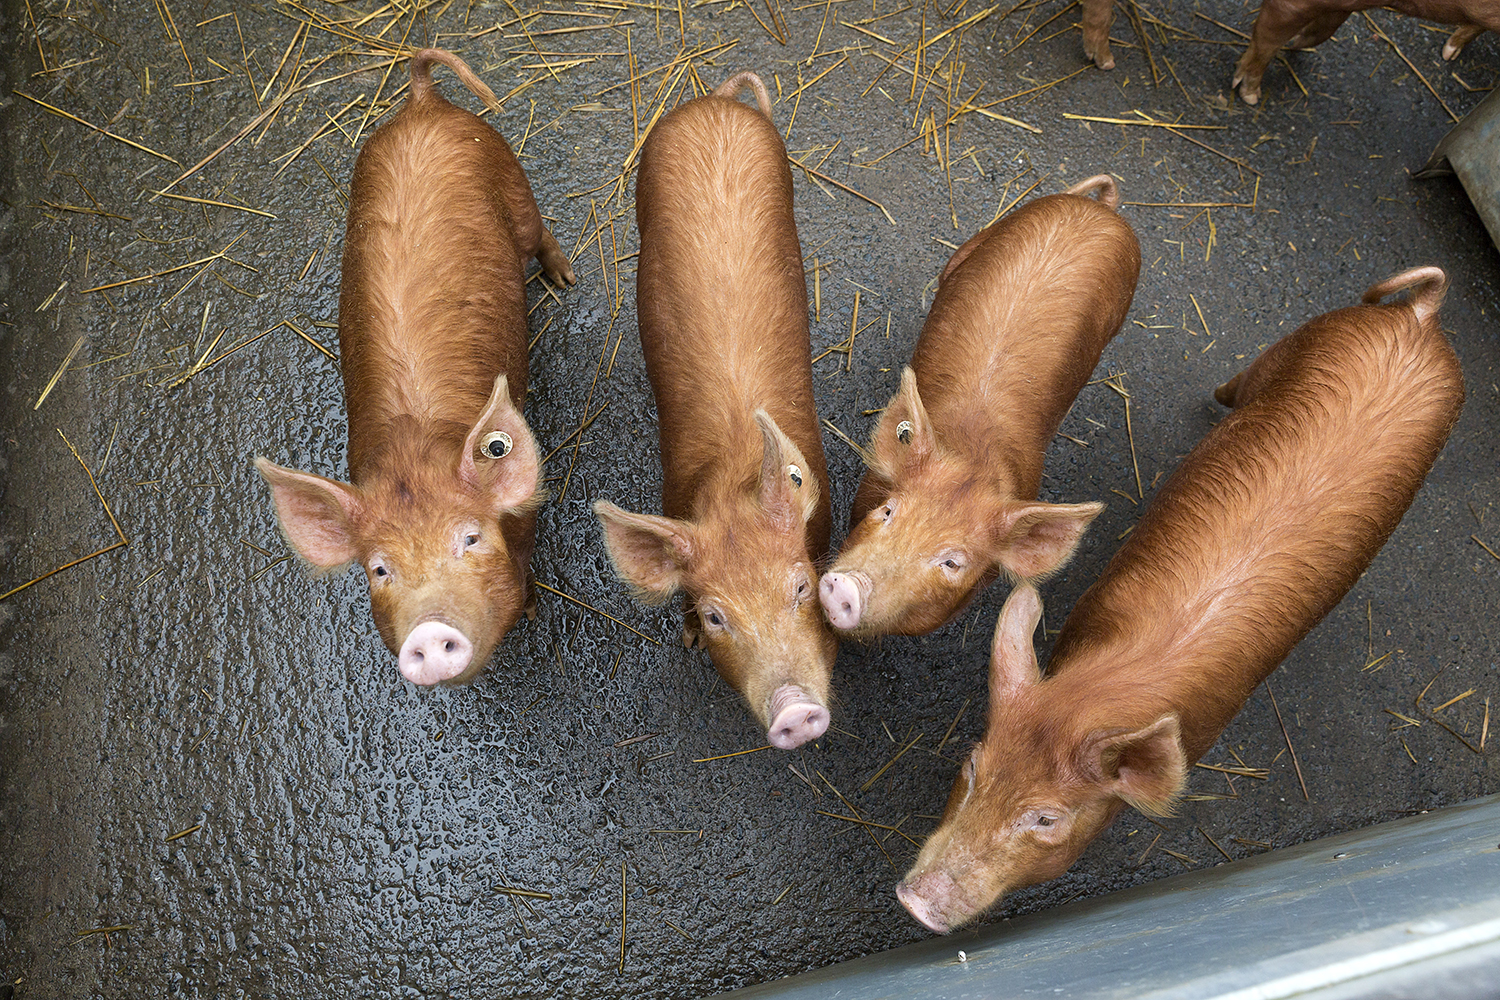 Four Tamworth piglets at the Wester Kittochside Farm © Ruth Armstrong Photography 